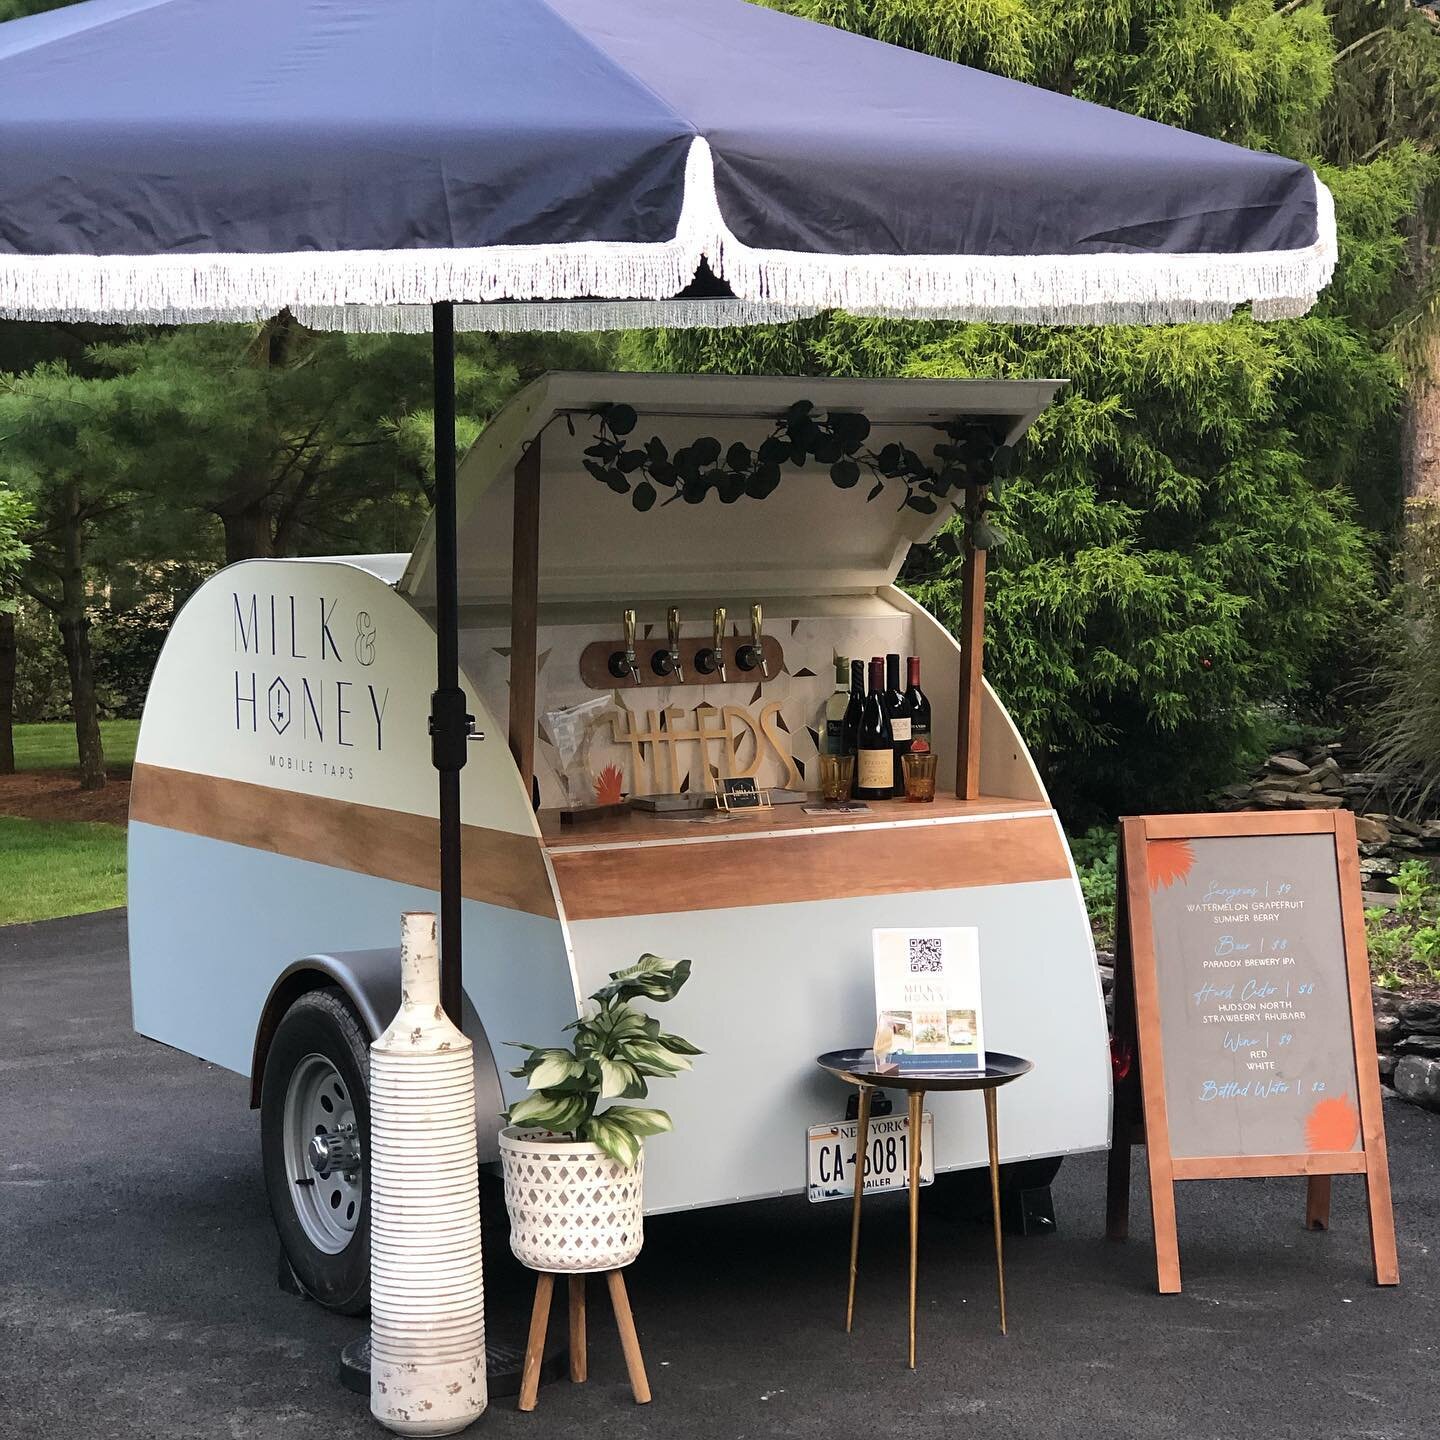 Ready for the weekend ahead ... this little guy has been ever soo popular this summer season. 

Pouring local craft beverages, mocktails, cold brew, ... you choose! Bring an added touch of elegance to your next special occasion with our tiny tap camp